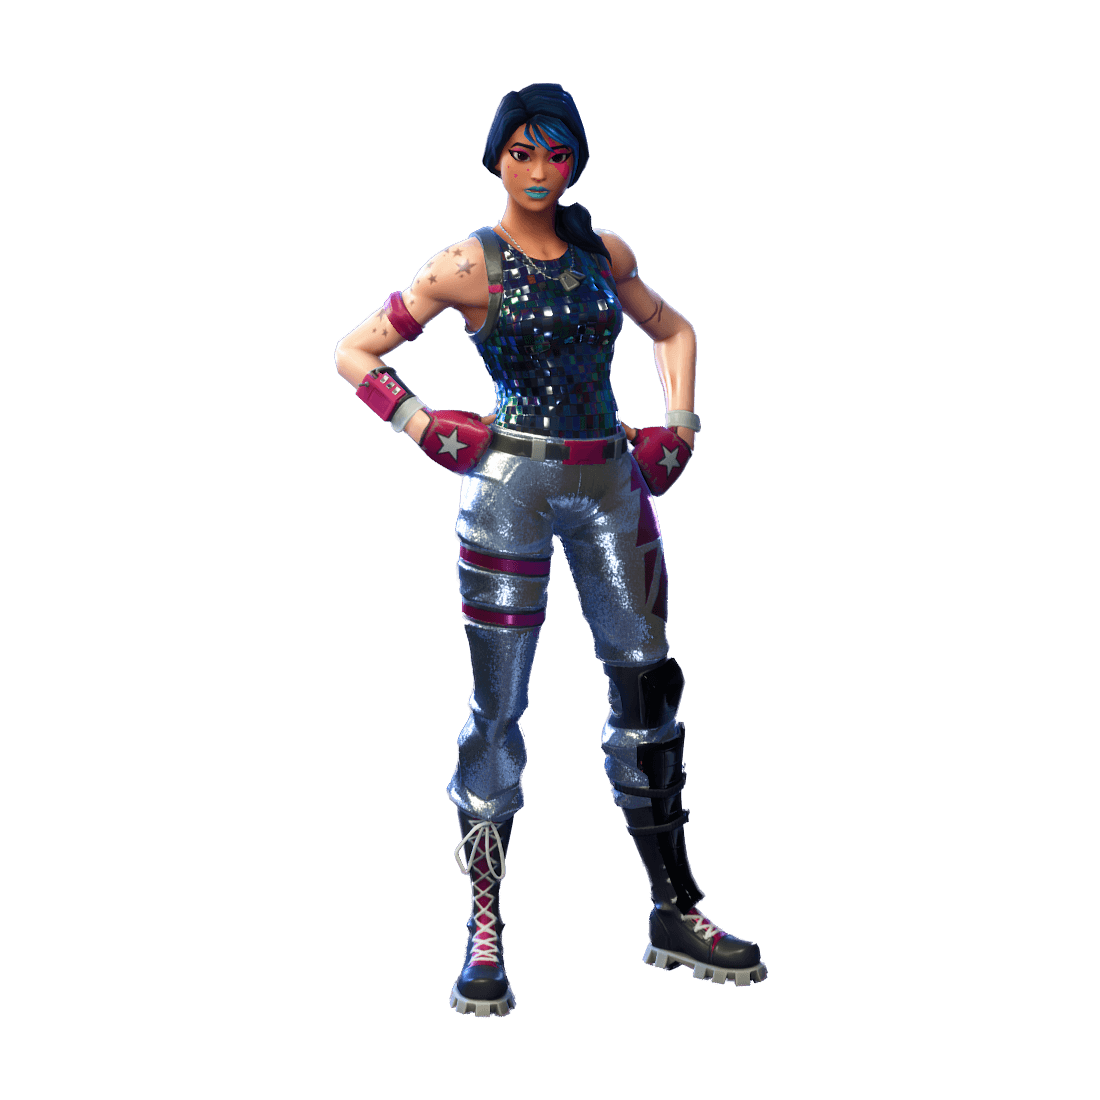 Sparkle Specialist. Fortnite in 2018